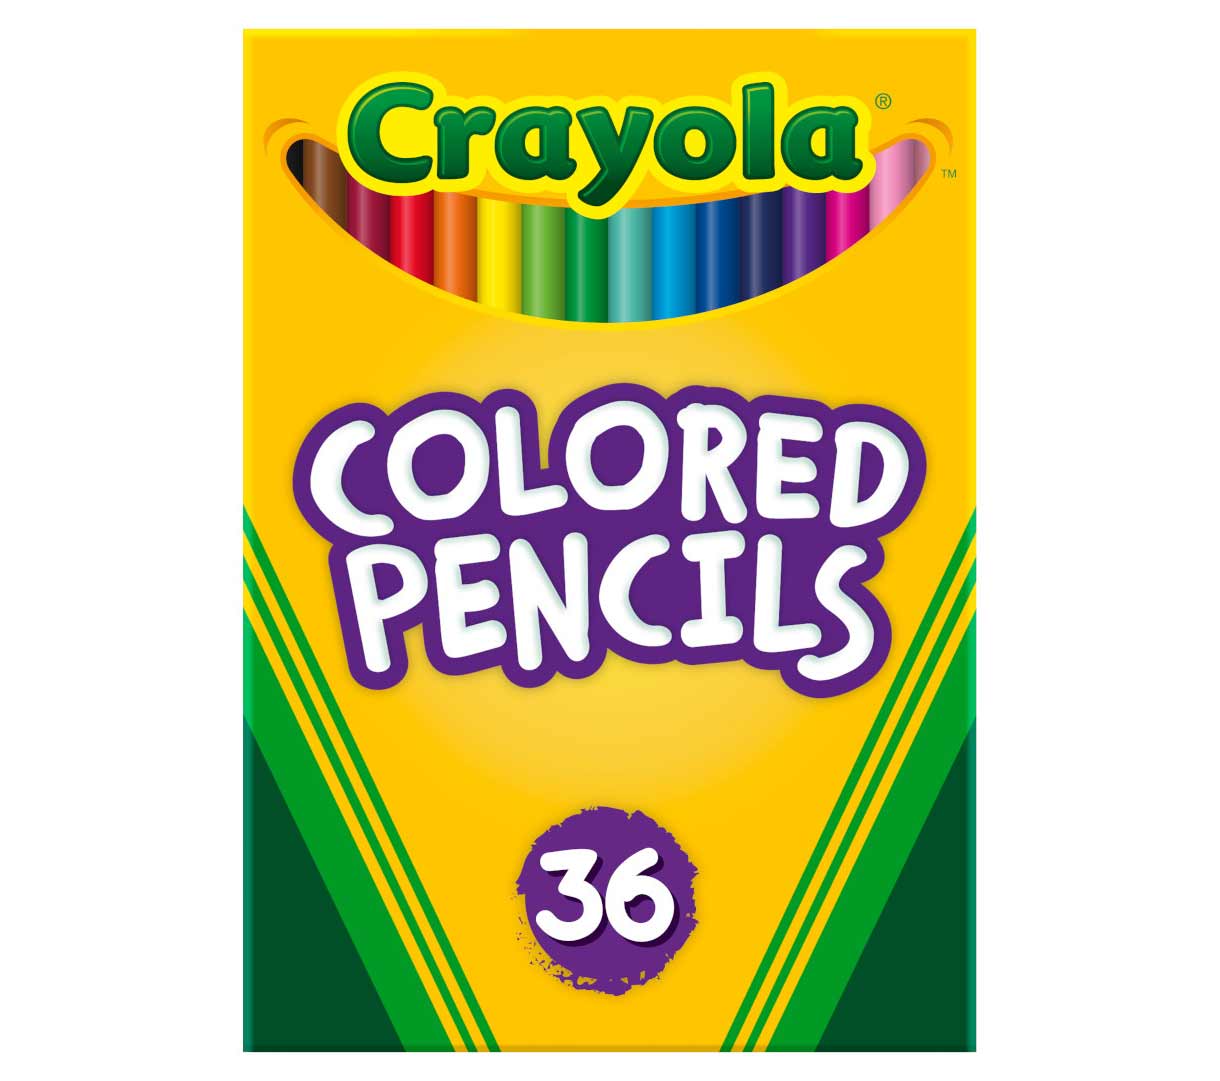 Crayola Colored Pencils (36ct), Kids Pencils Set, Art Supplies, Great for